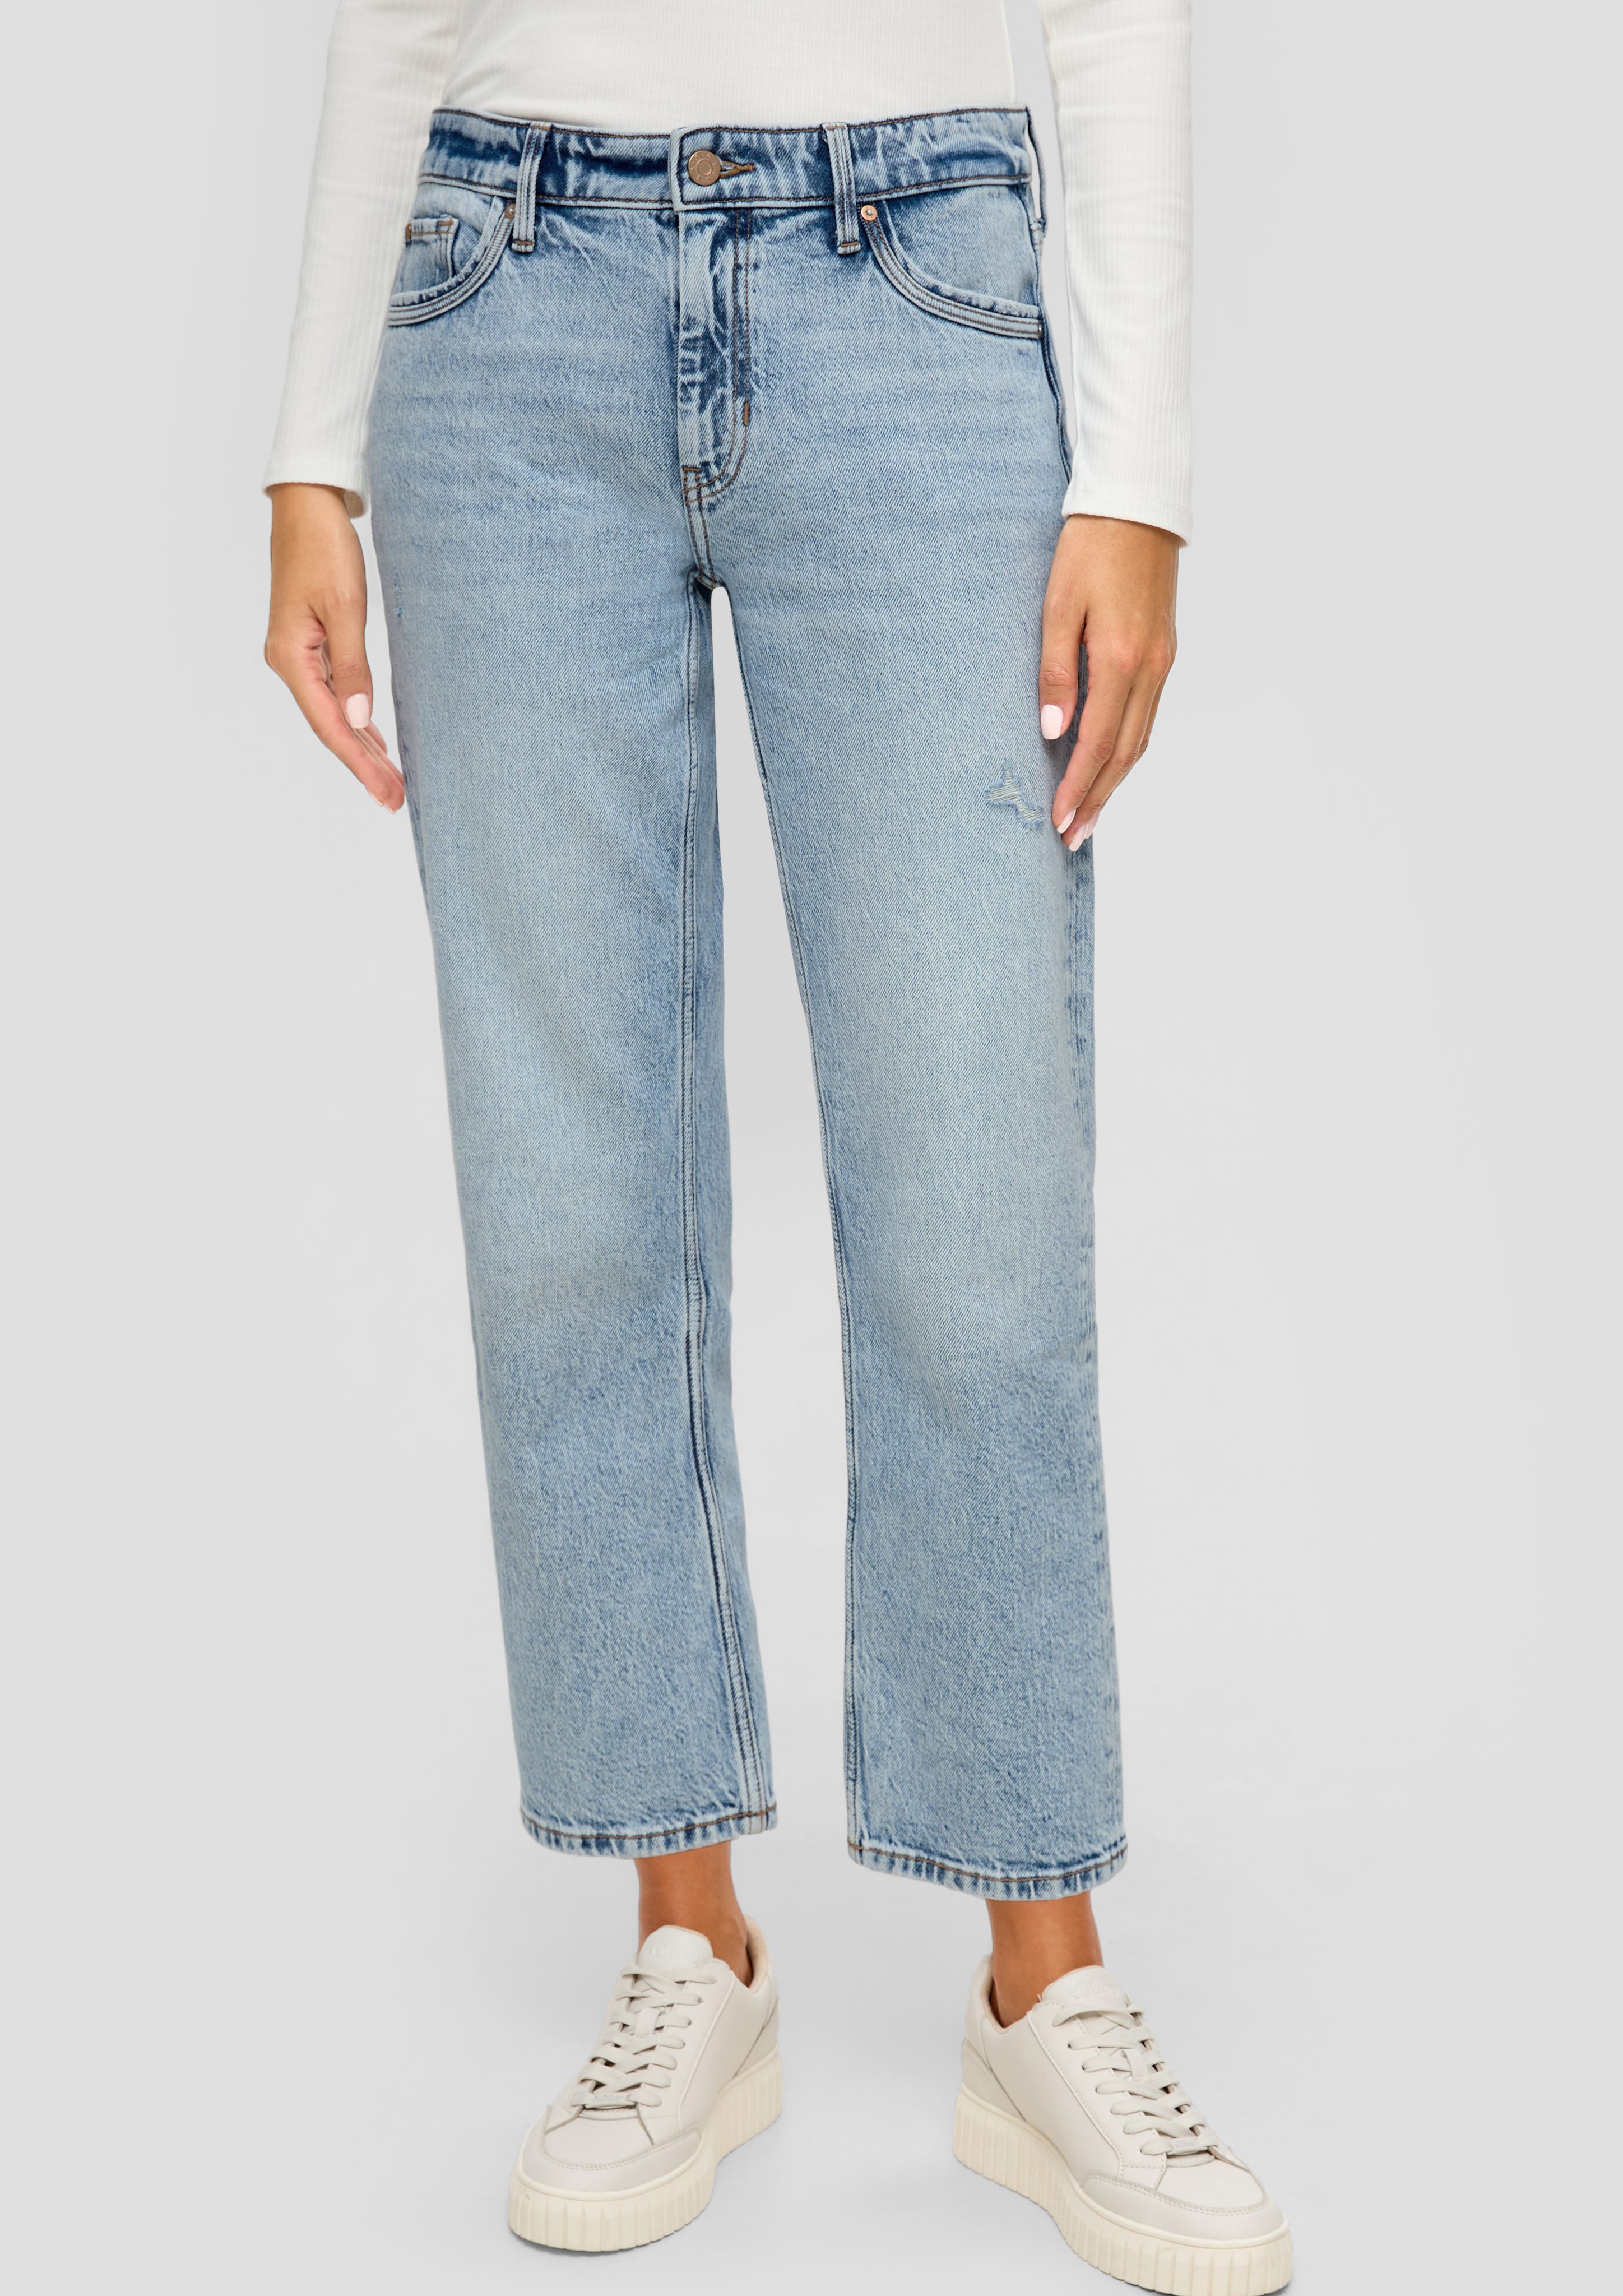 Straight Cropped-Jeans 7/8-Jeans / Waschung / Fit / Regular Rise Leg s.Oliver Karolin Mid